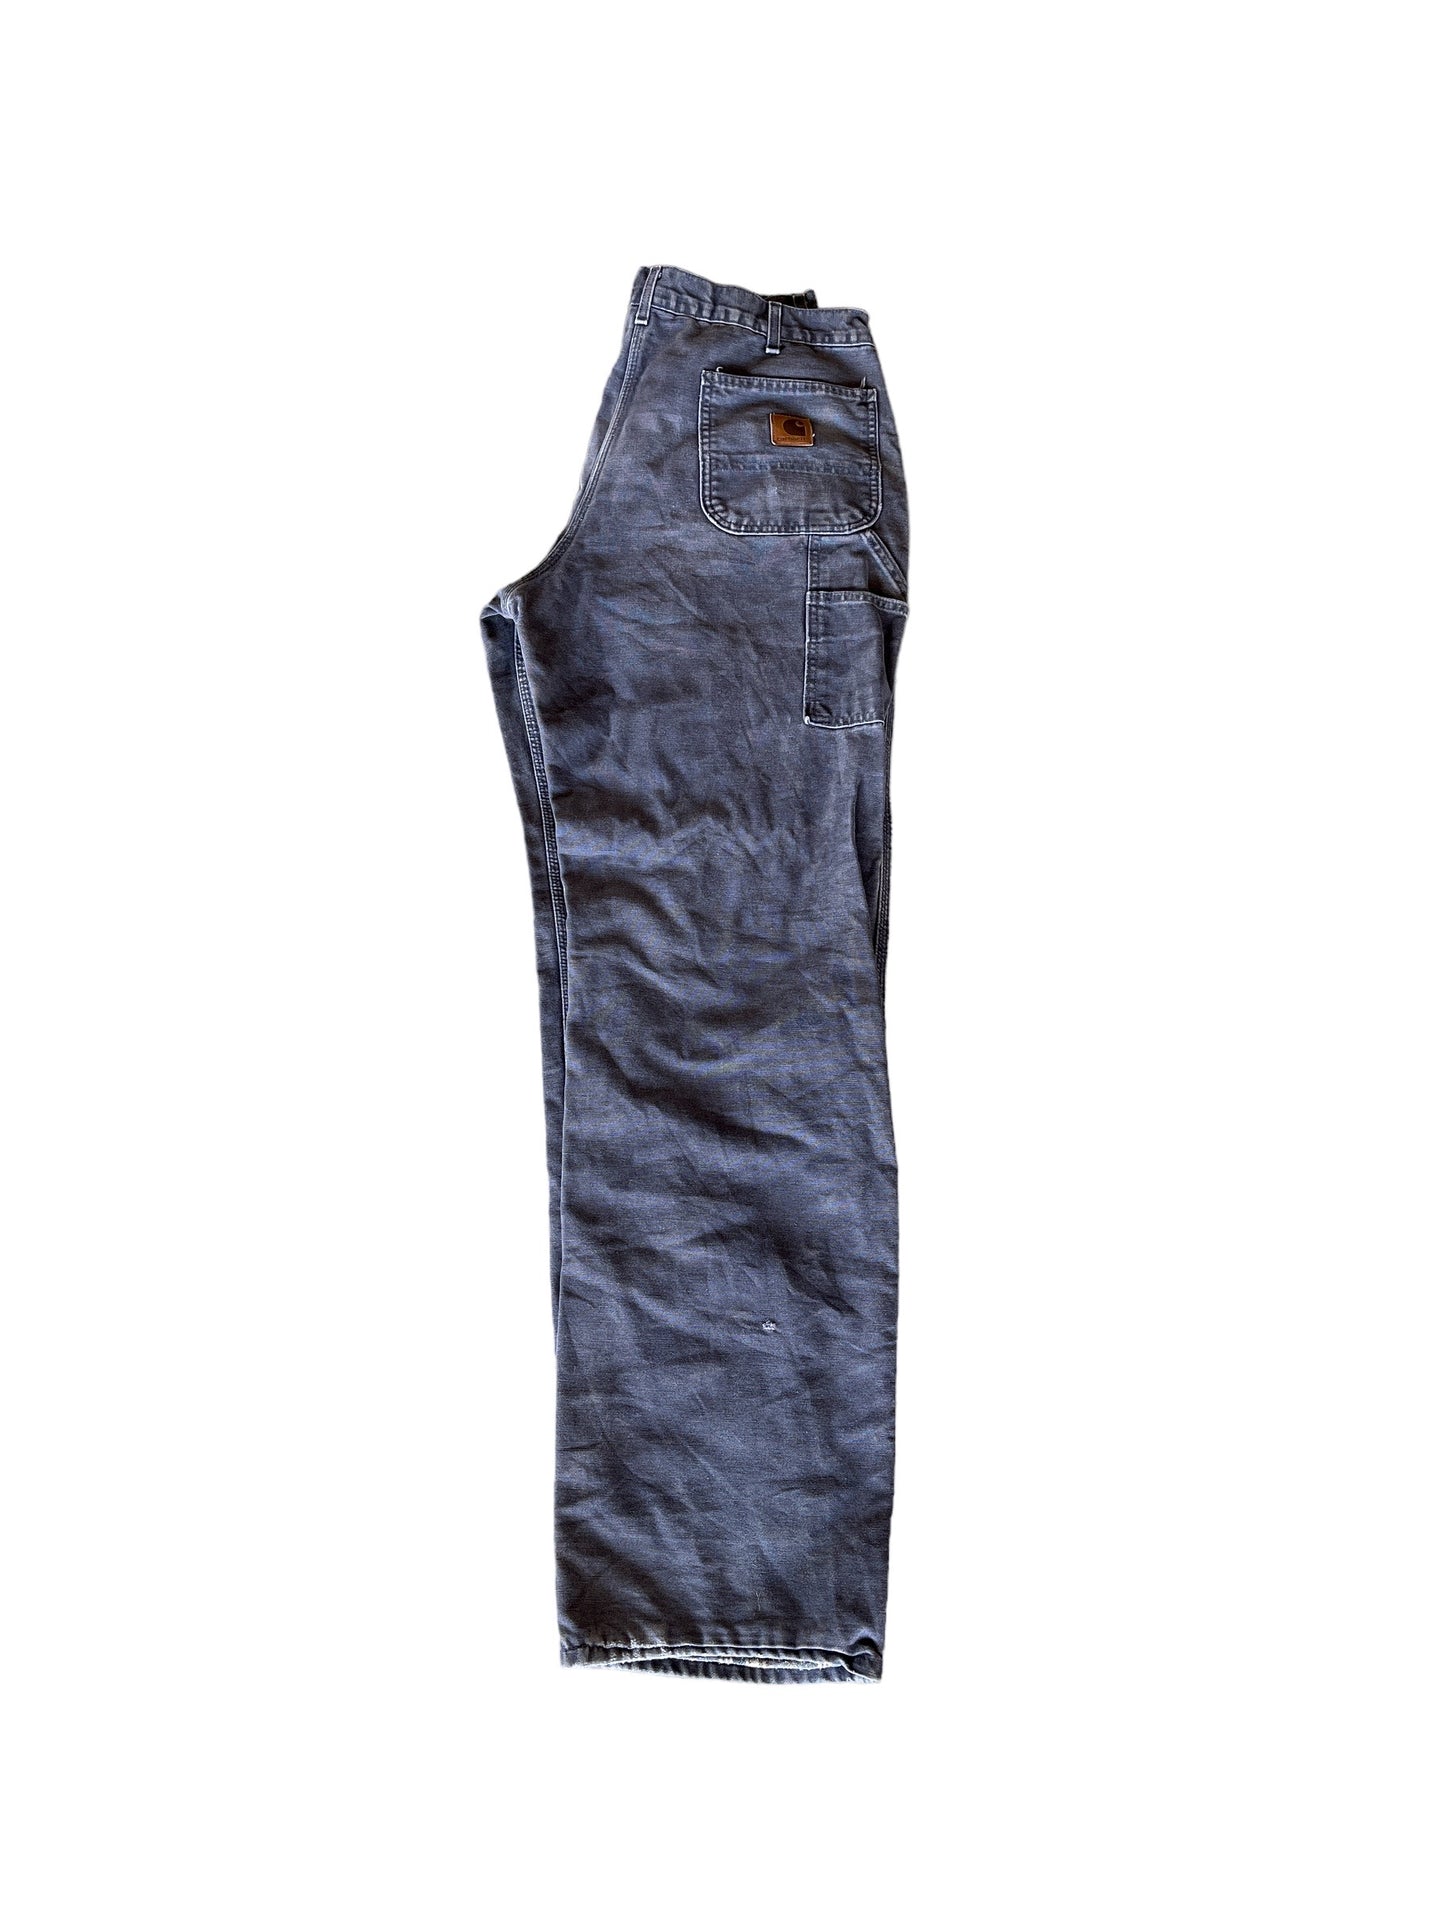 Vintage Carhartt Relaxed Pants Charcoal Grey - 36